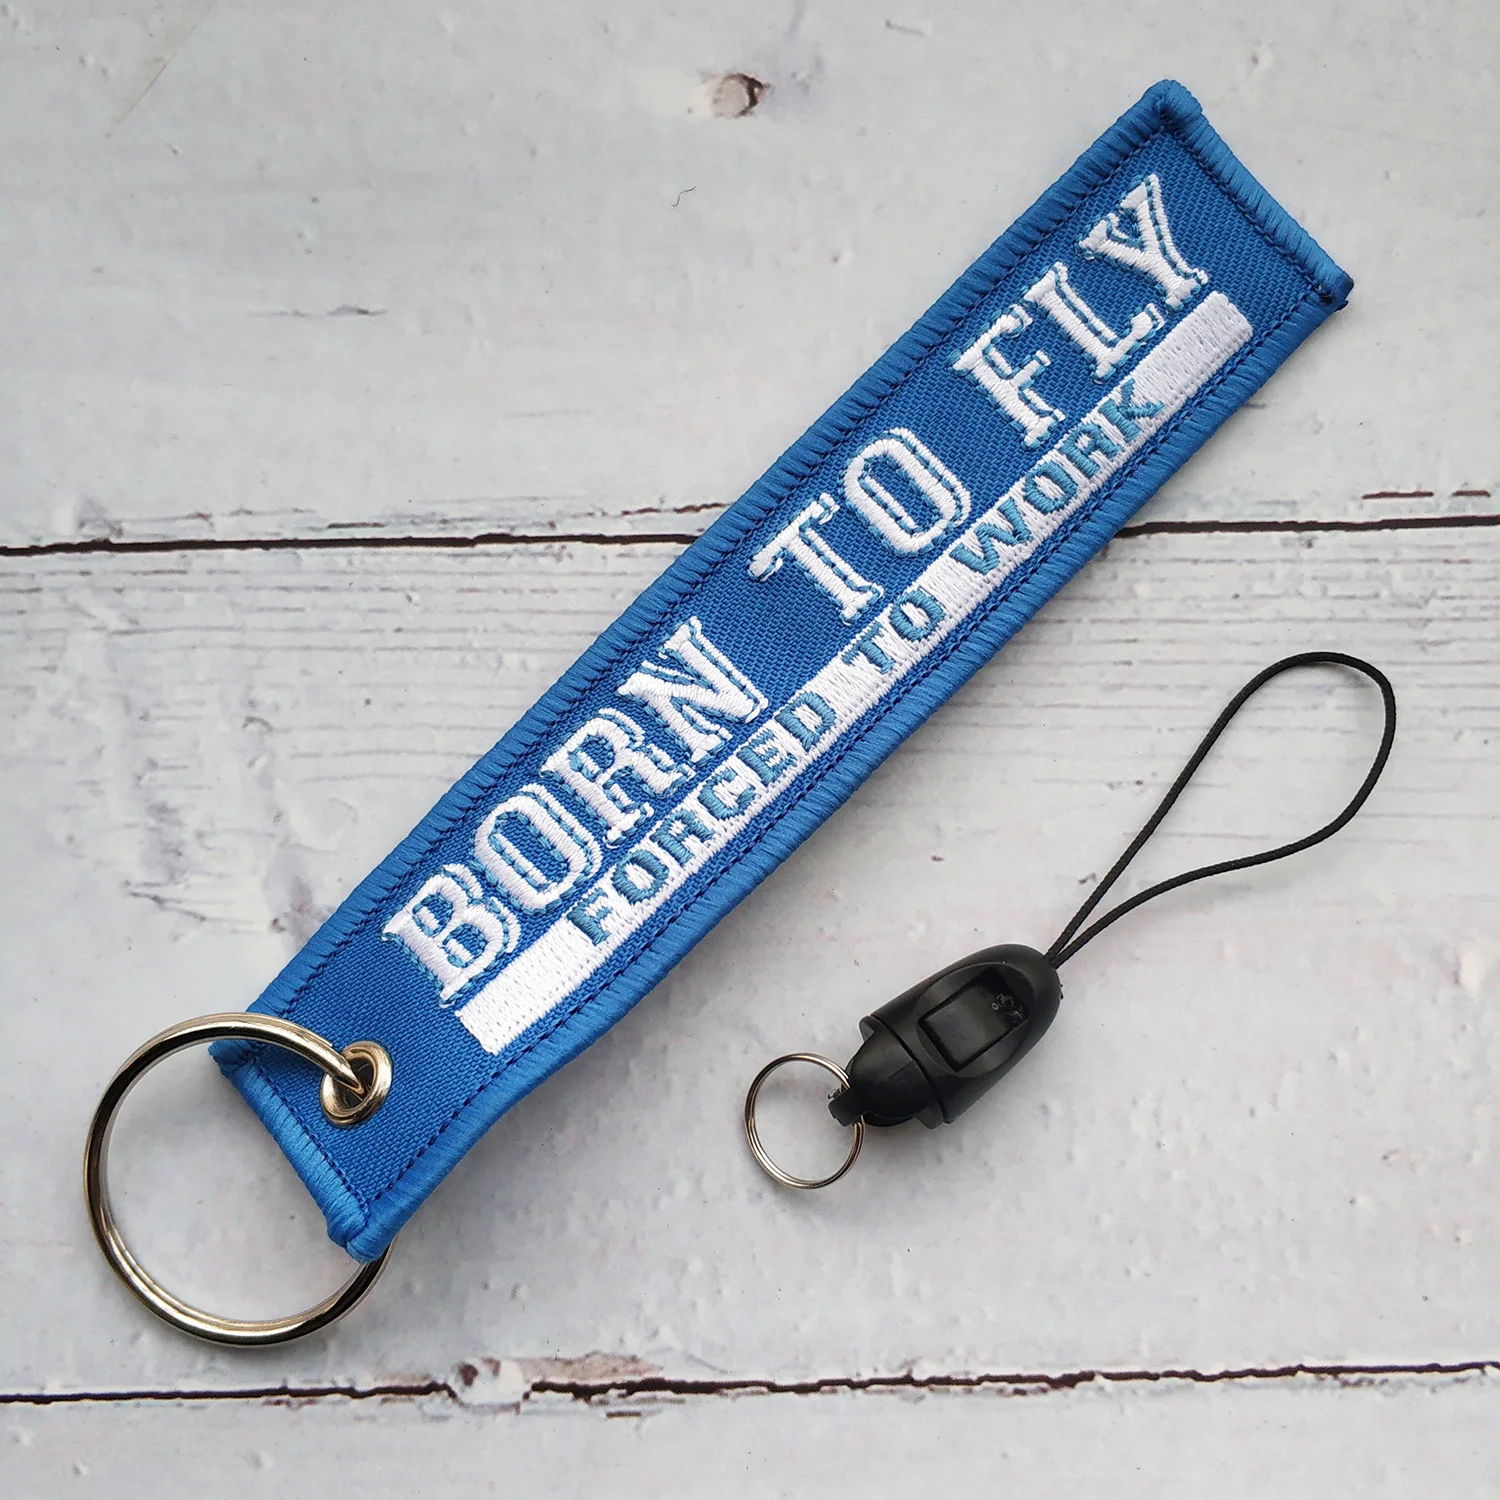 Blue BORN TO FLY Phone Strap for iPhone Wrist Strap Embroidey ID Card Gym Phone Case Bracelet Strap USB Badge Holder for Aviator